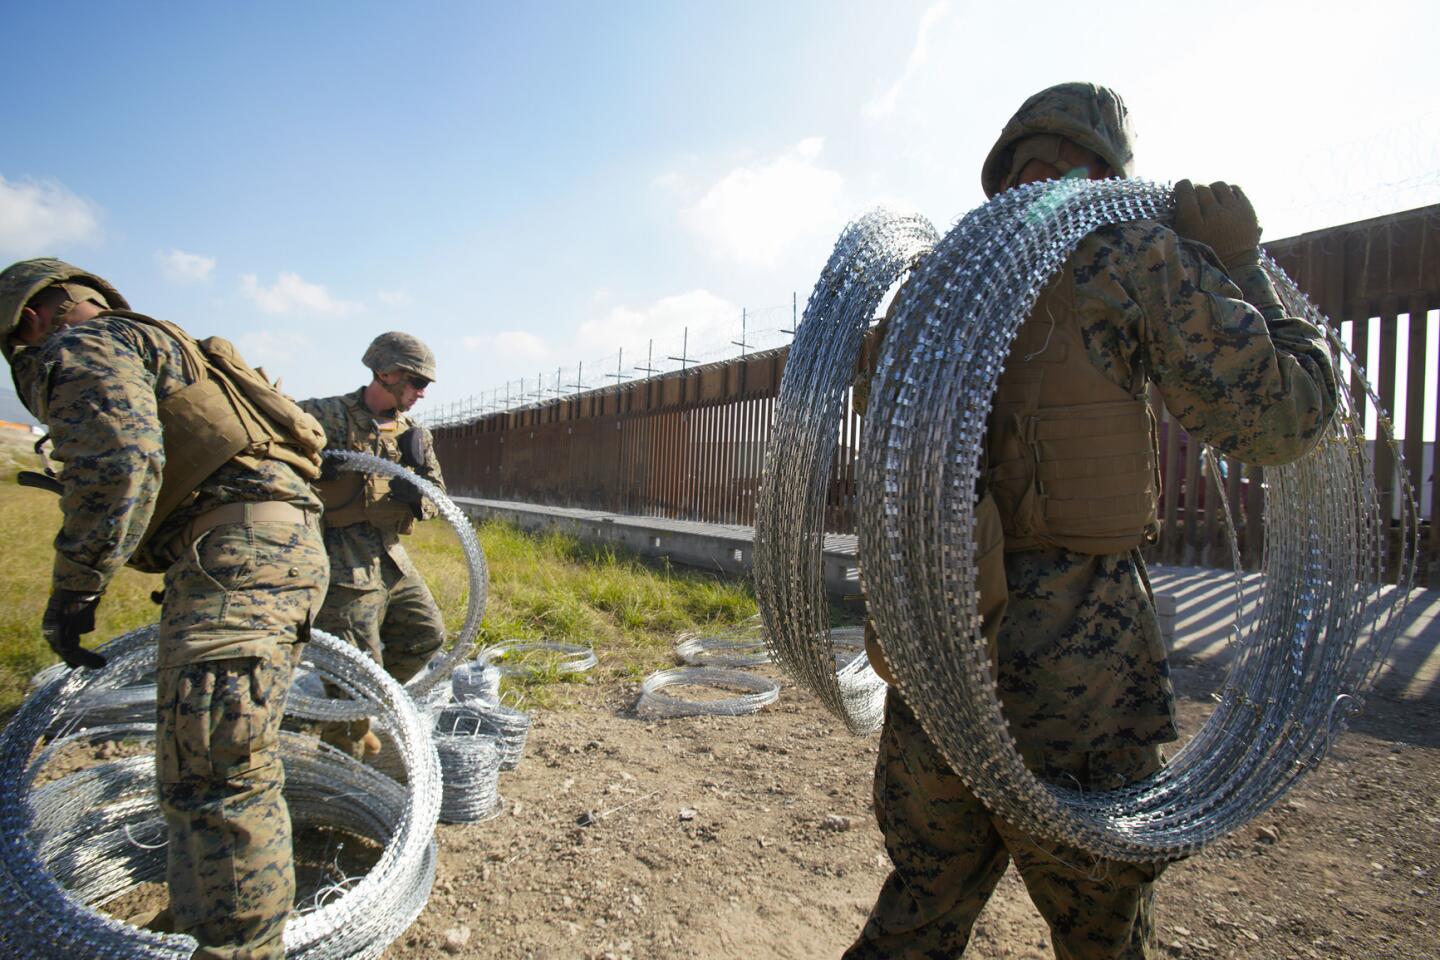 Fortifying the U.S. border along Mexico